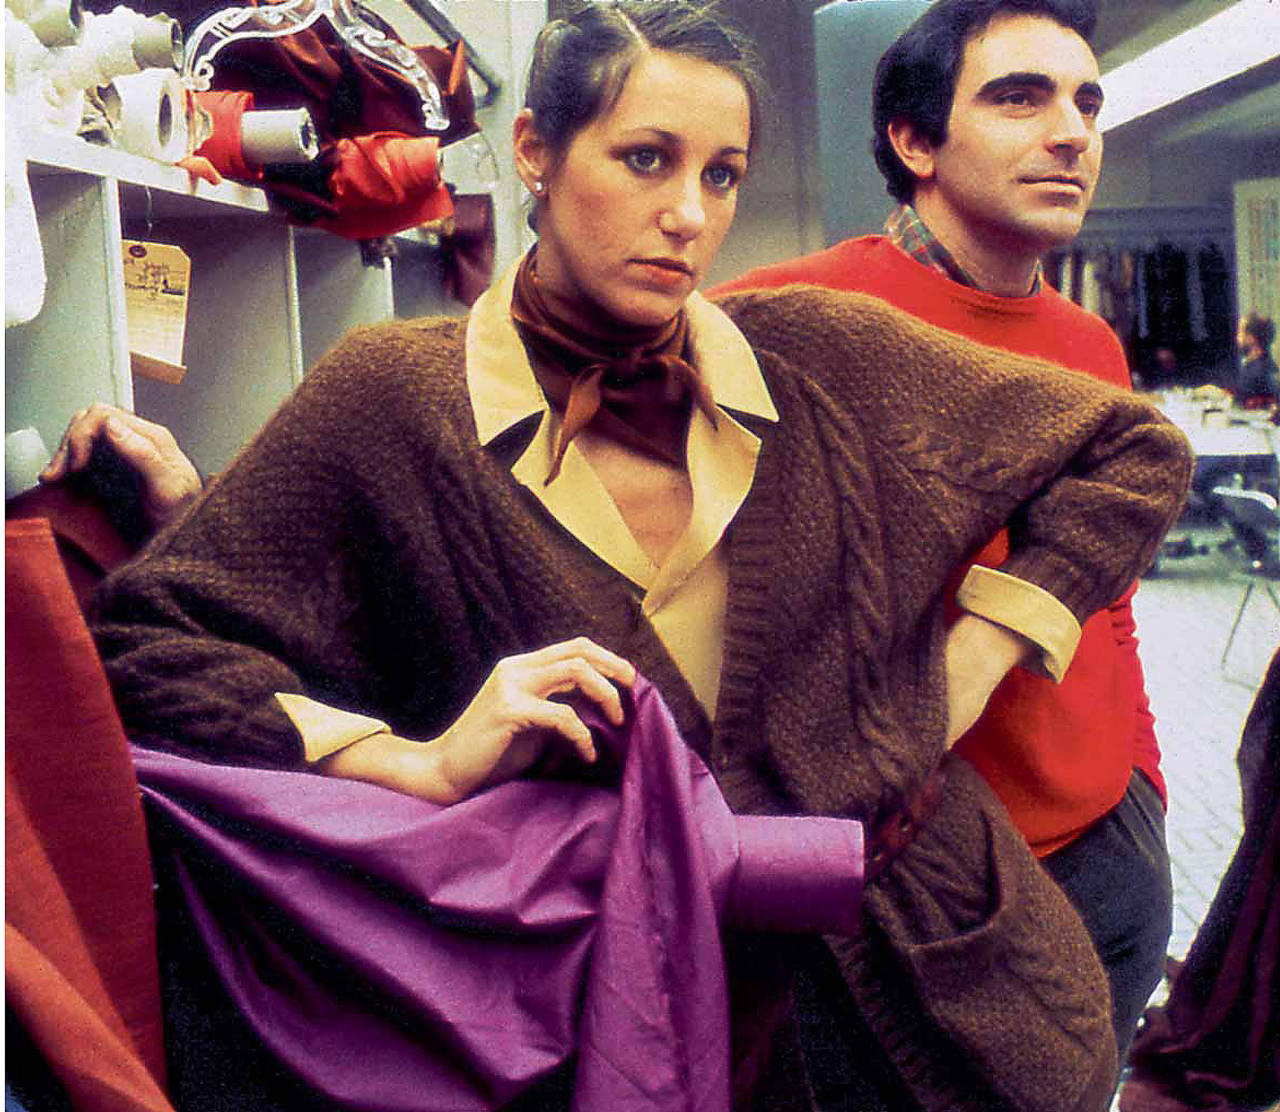 Rose Hartman Color Photograph - Donna Karan and Louis Dell' Ollio, 7th Ave. Atelier, 1979